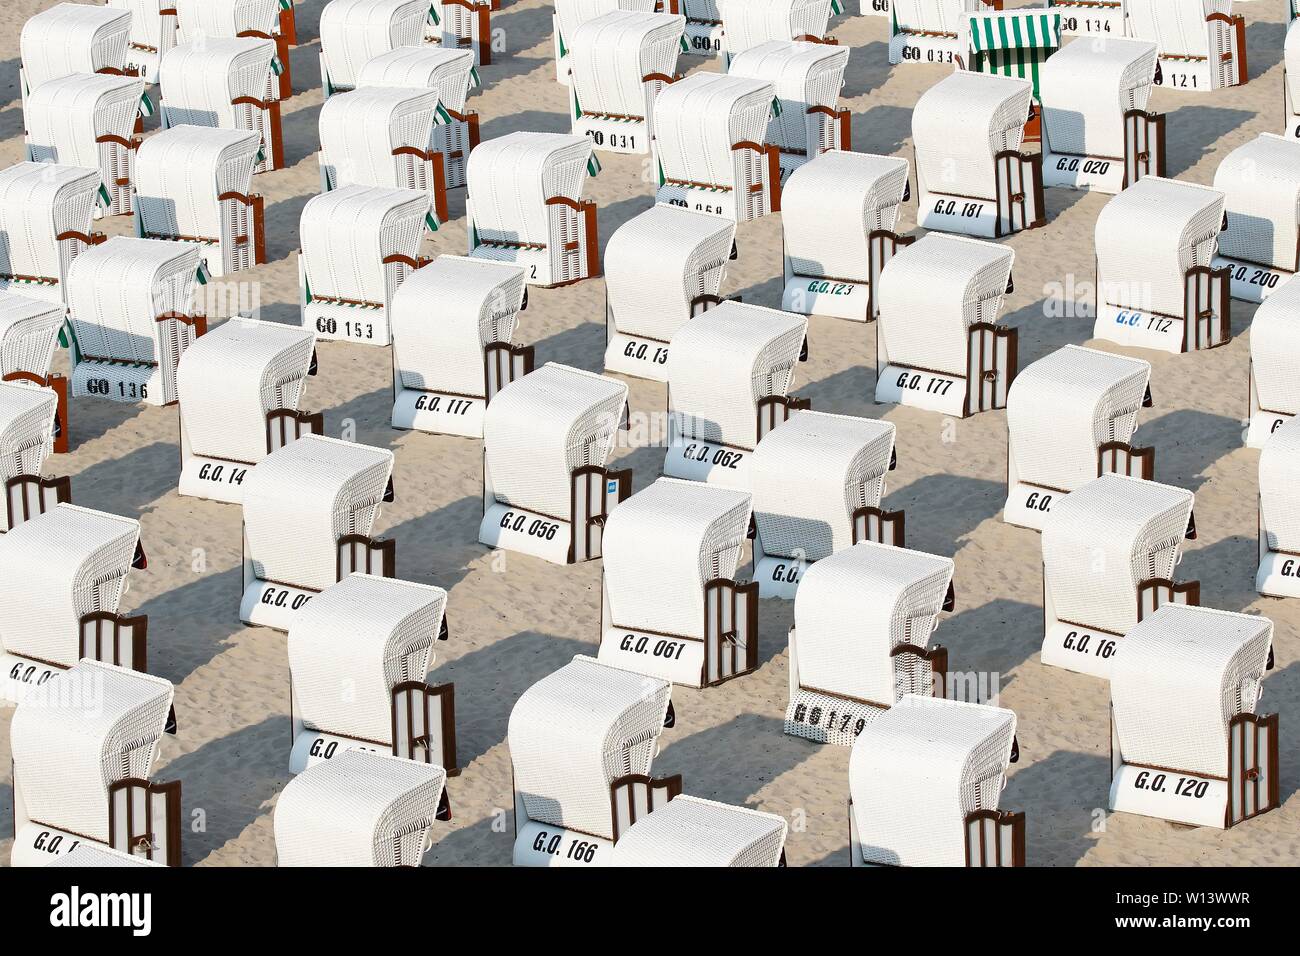 White beach chairs at the beach, Baltic seaside resort Sellin, island Rugen, Mecklenburg-Western Pomerania, Germany Stock Photo